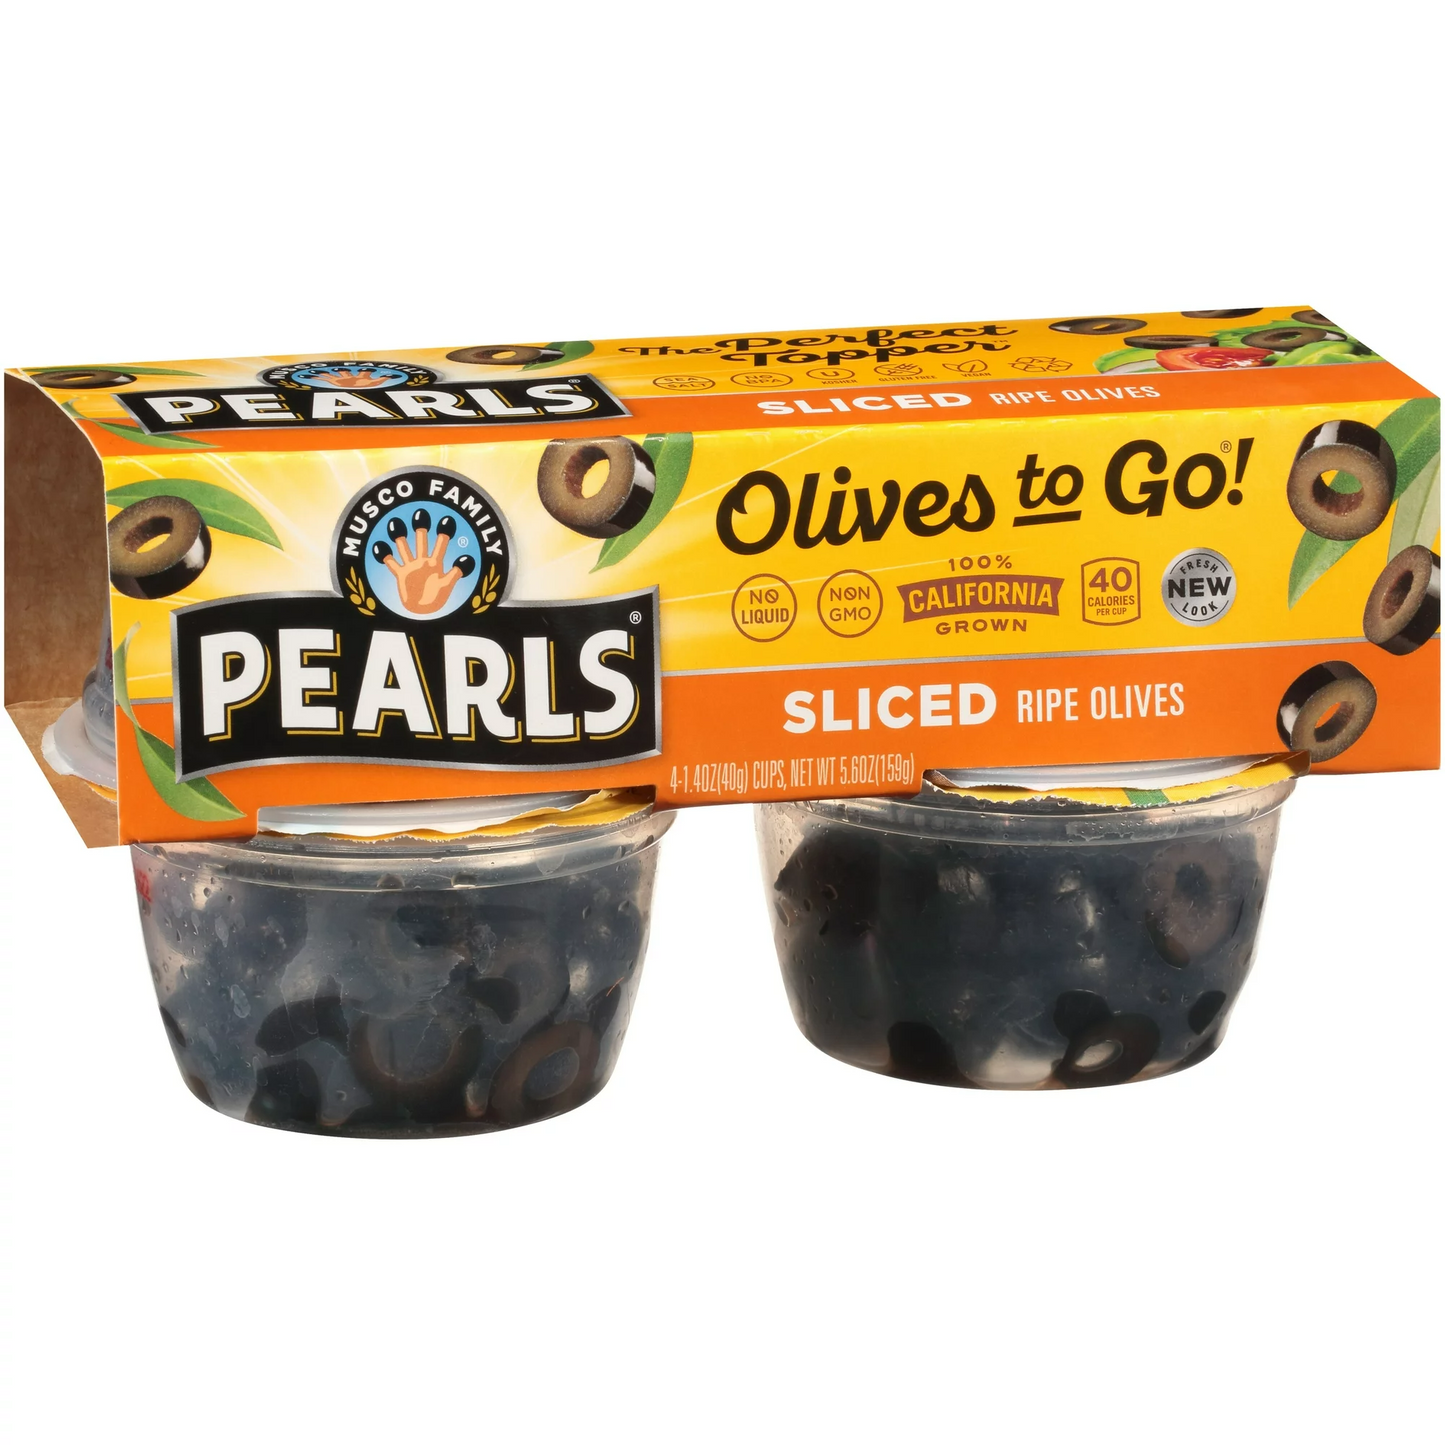 Pearls® Sliced California Ripe Olives 4-1.4 oz. Cup